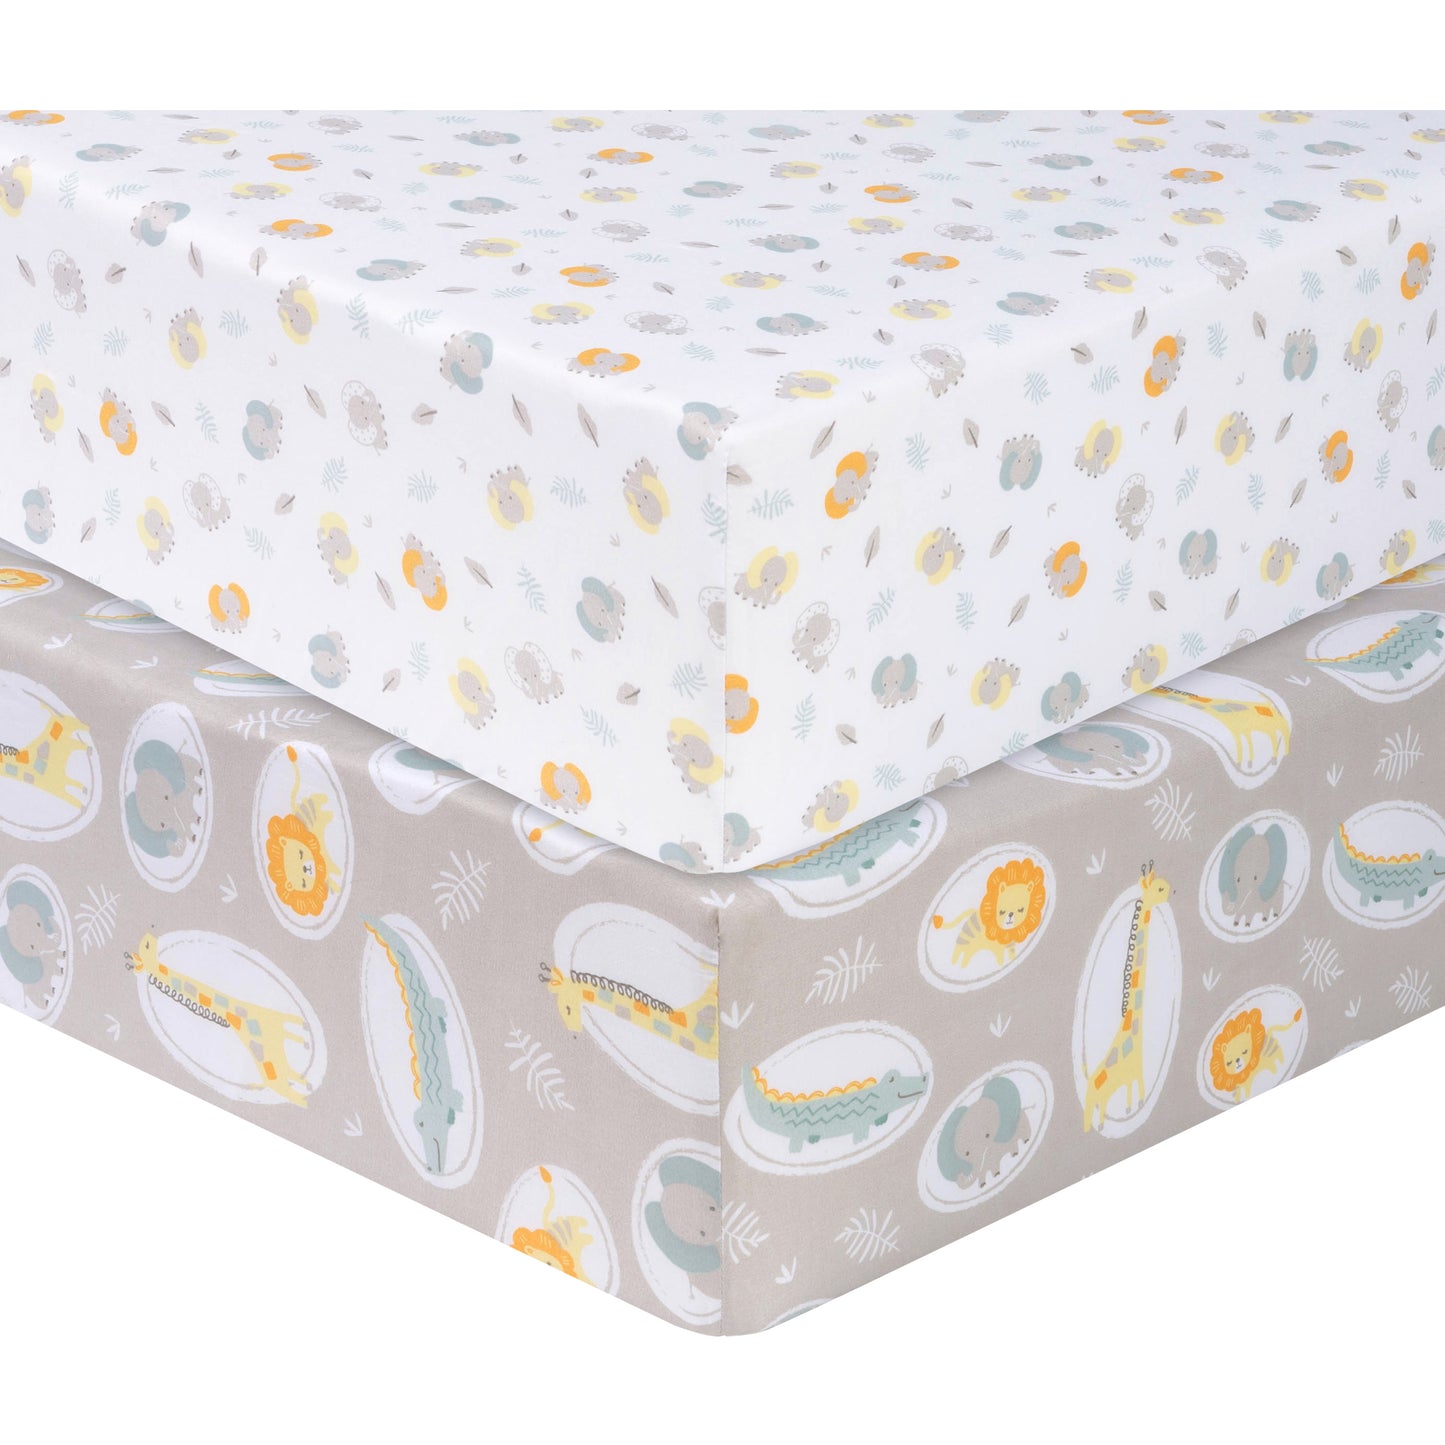 Jungle Pals 2- Pack Microfiber Fitted Crib Sheet Set by Sammy & Lou®